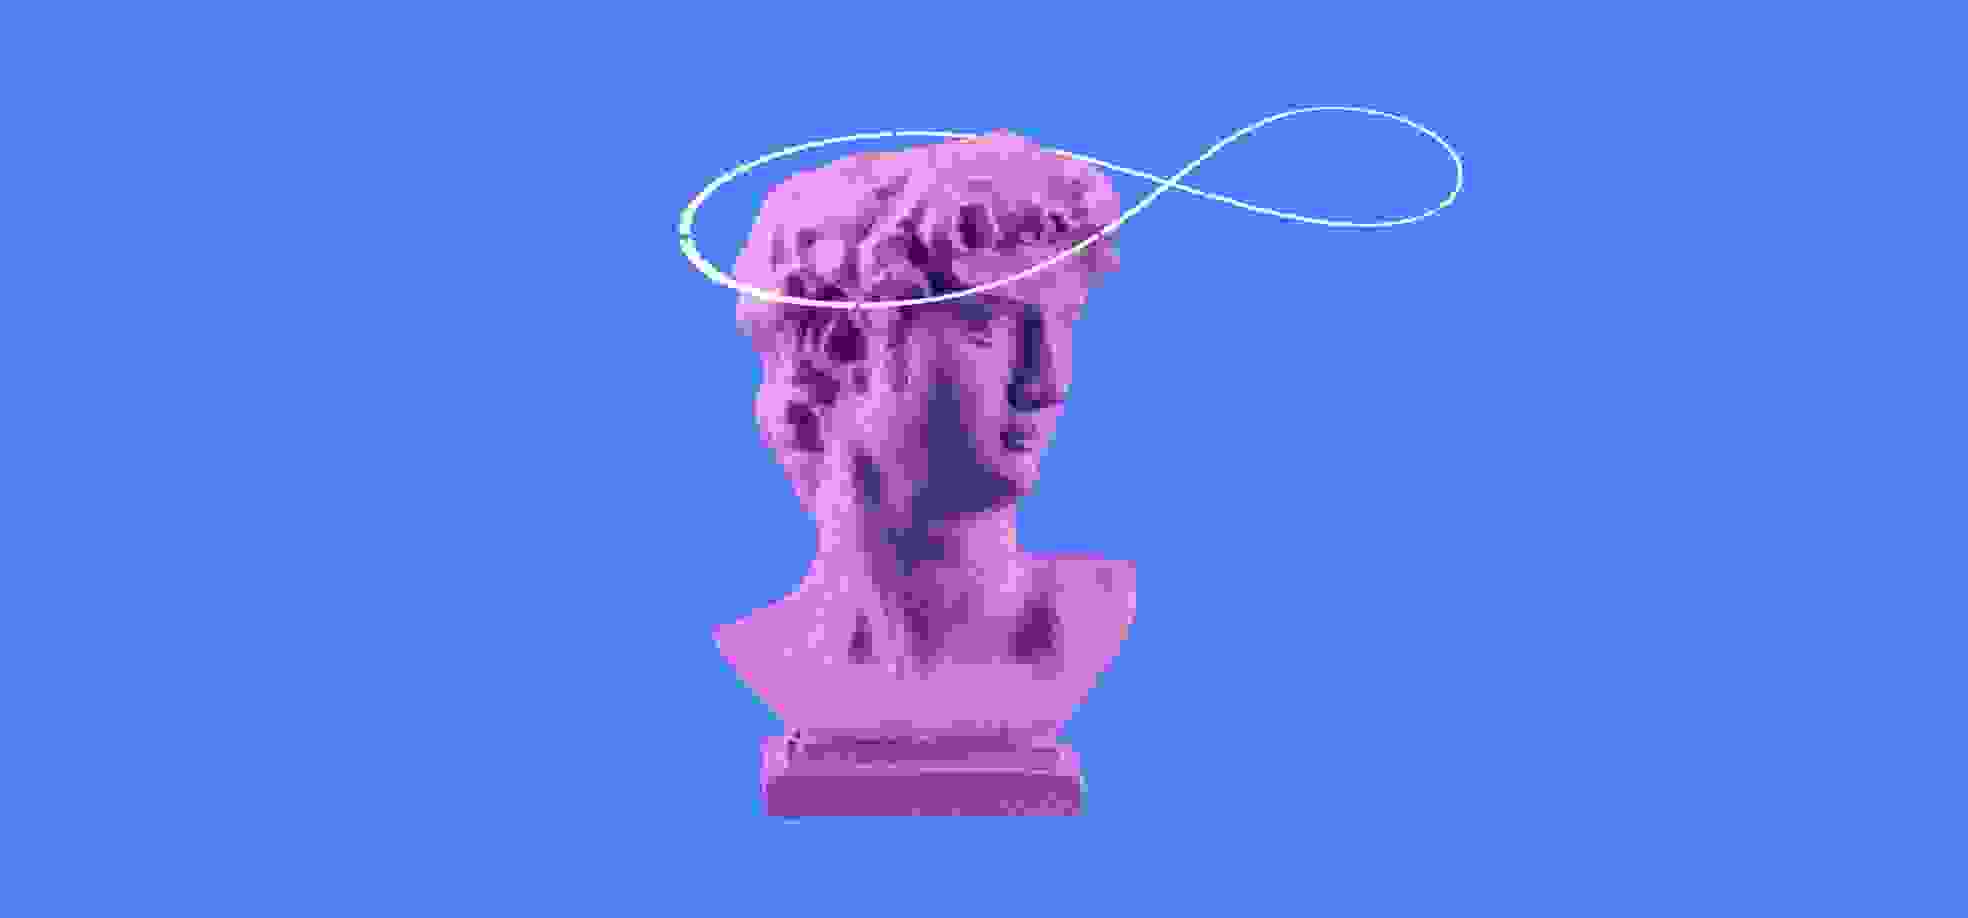 illustration of a Bust of David on a blue background